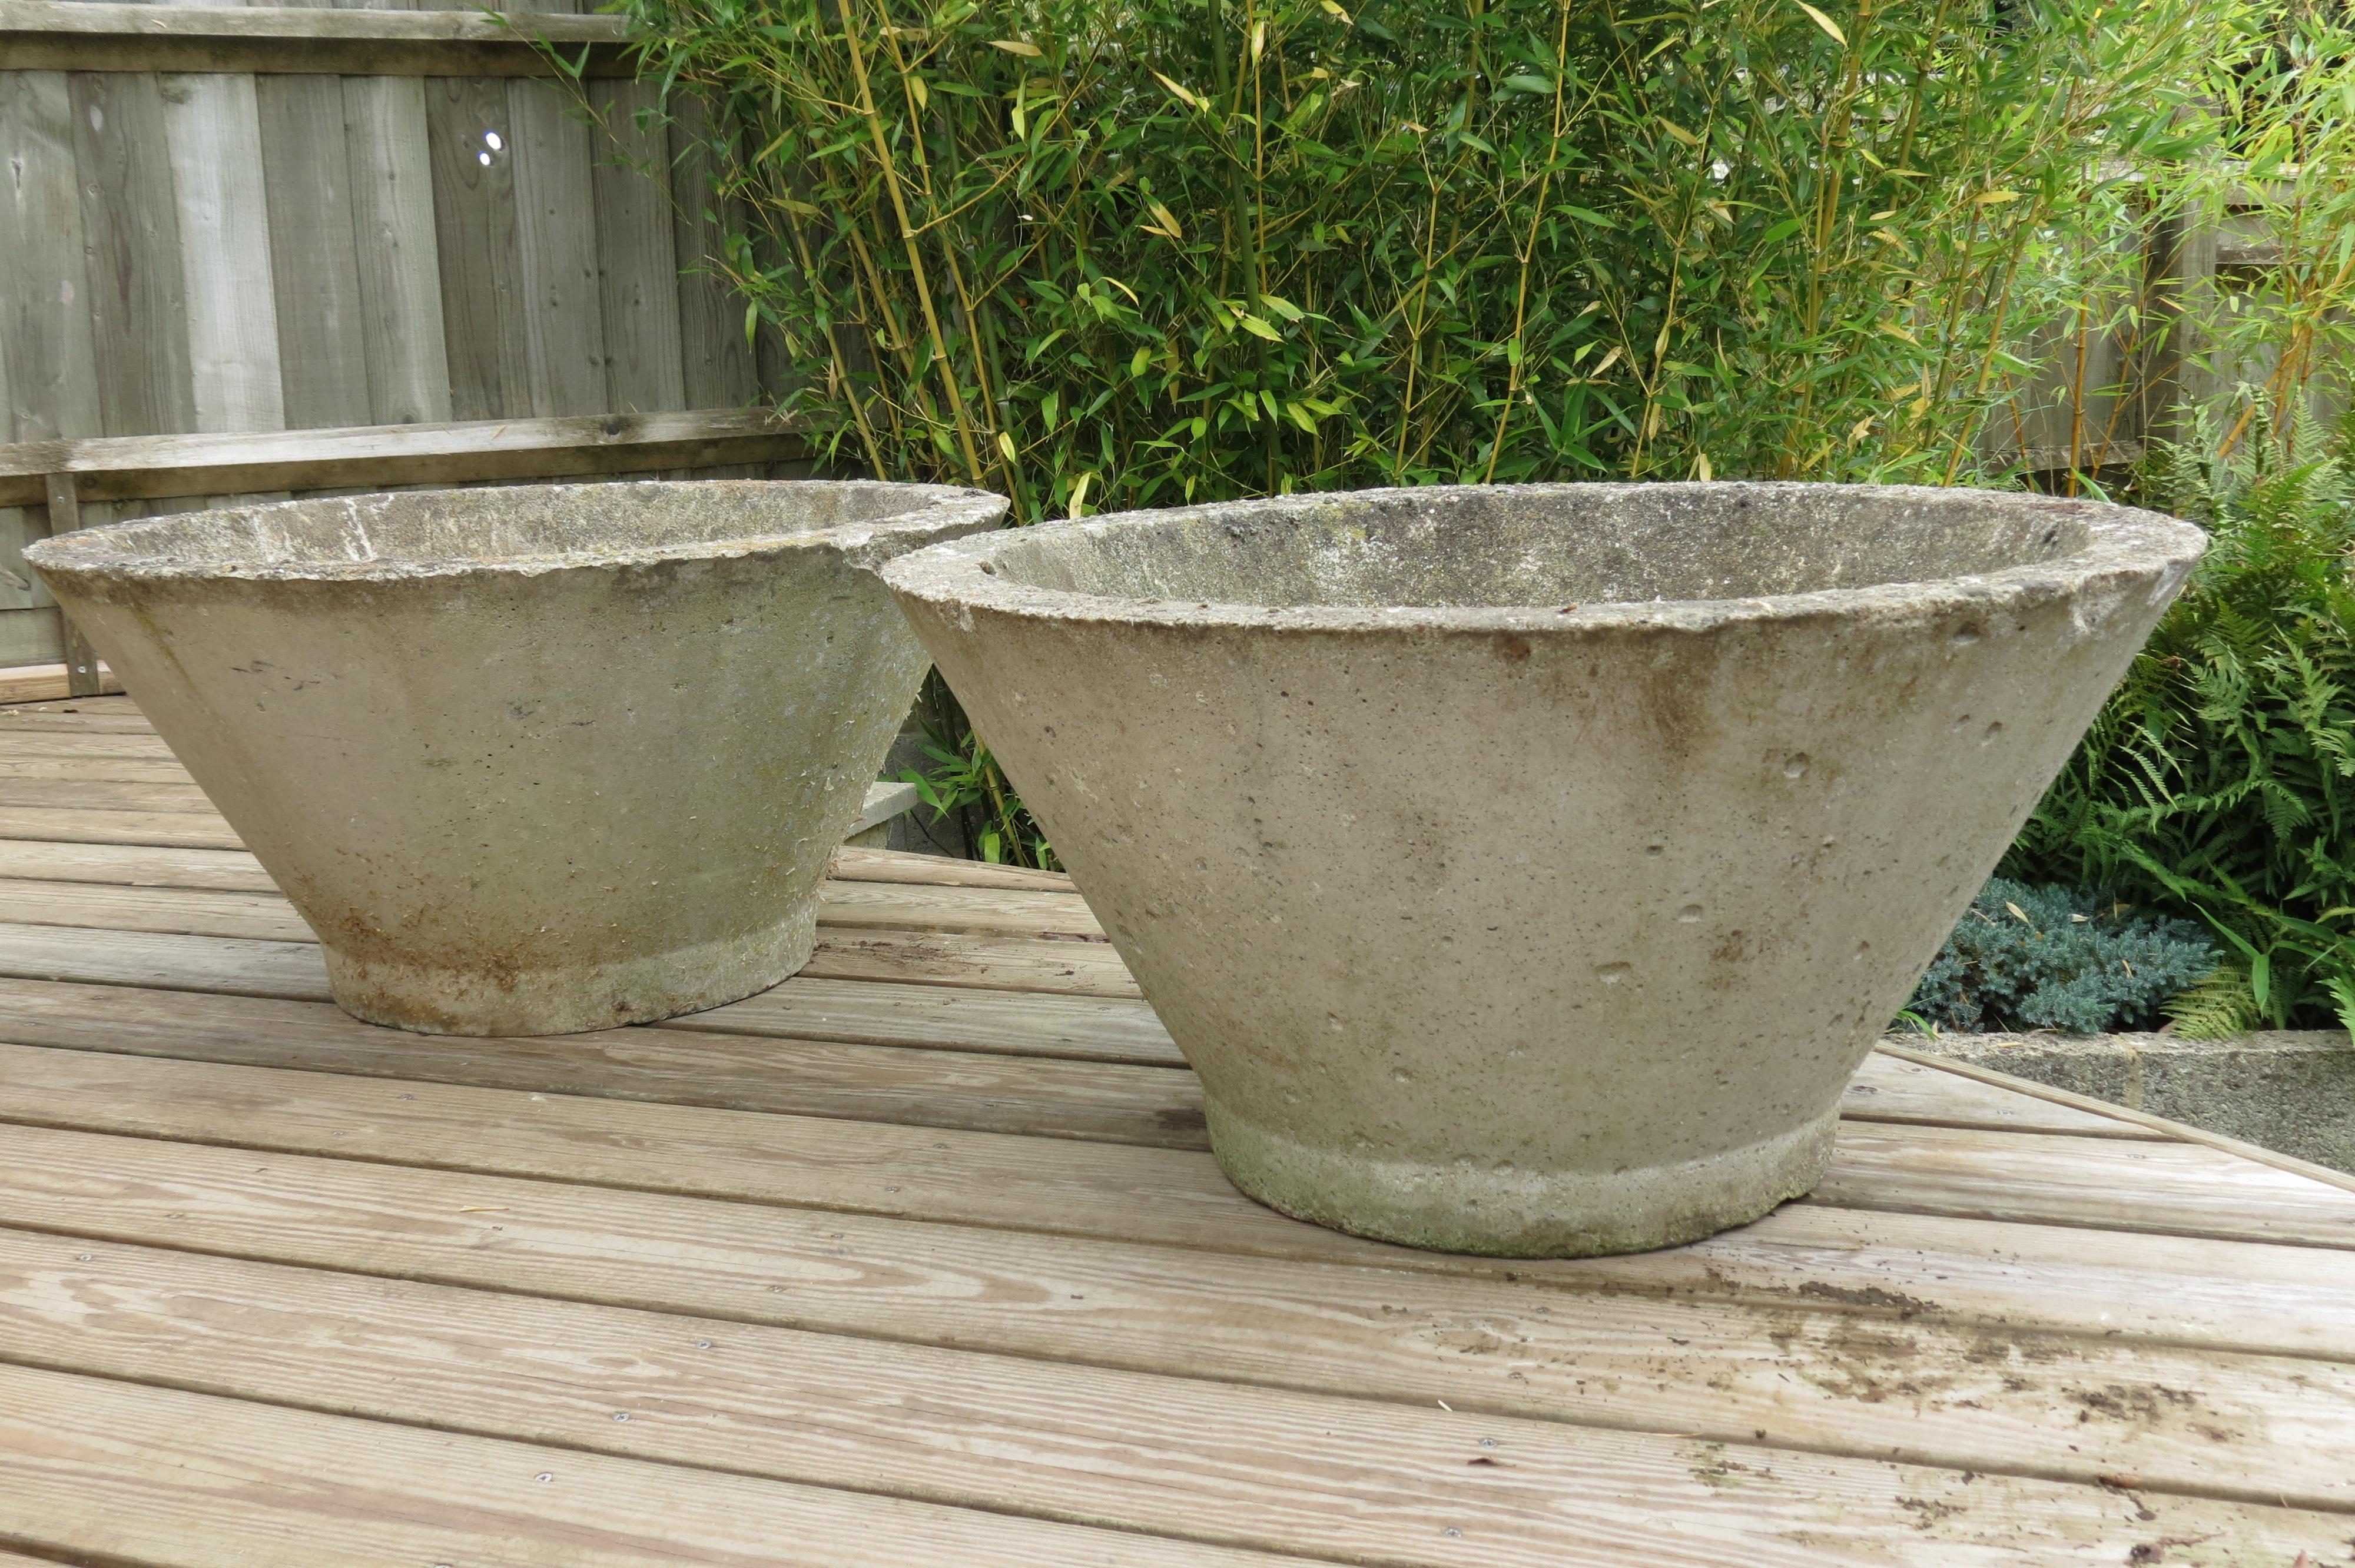 Wonderful pair of large solid concrete plant pots.  They date from the 1970s and would possibly have been used in a municipal setting.  Great modernist shape would provide excellent potting for any garden.

In good over all condition, structurally